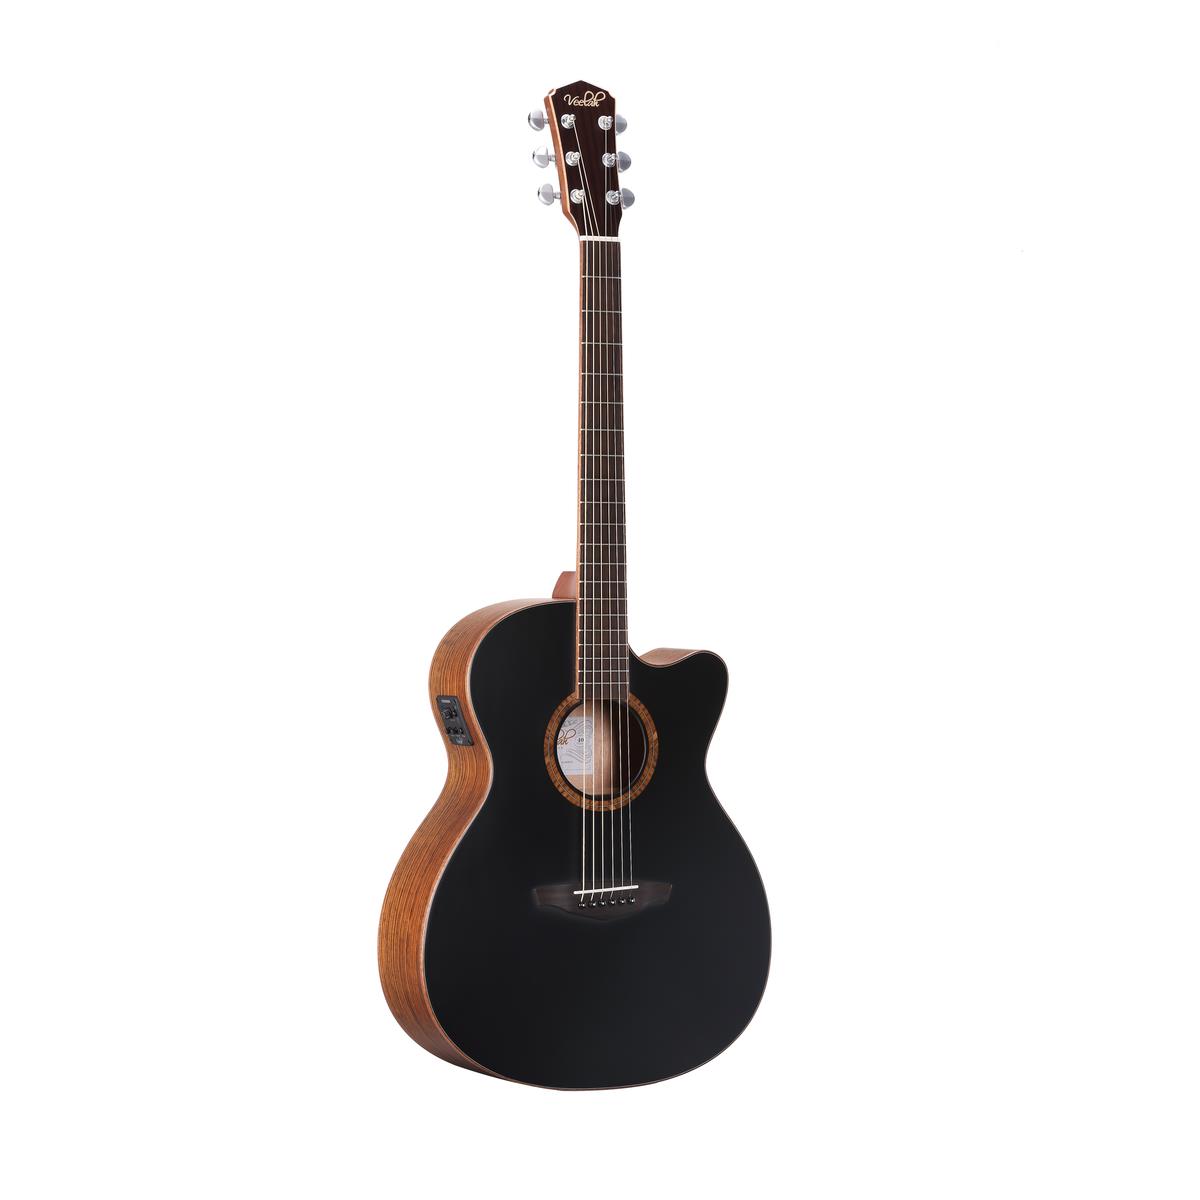 Donner Support Mural pour Guitare Noir, accroche guitare mural